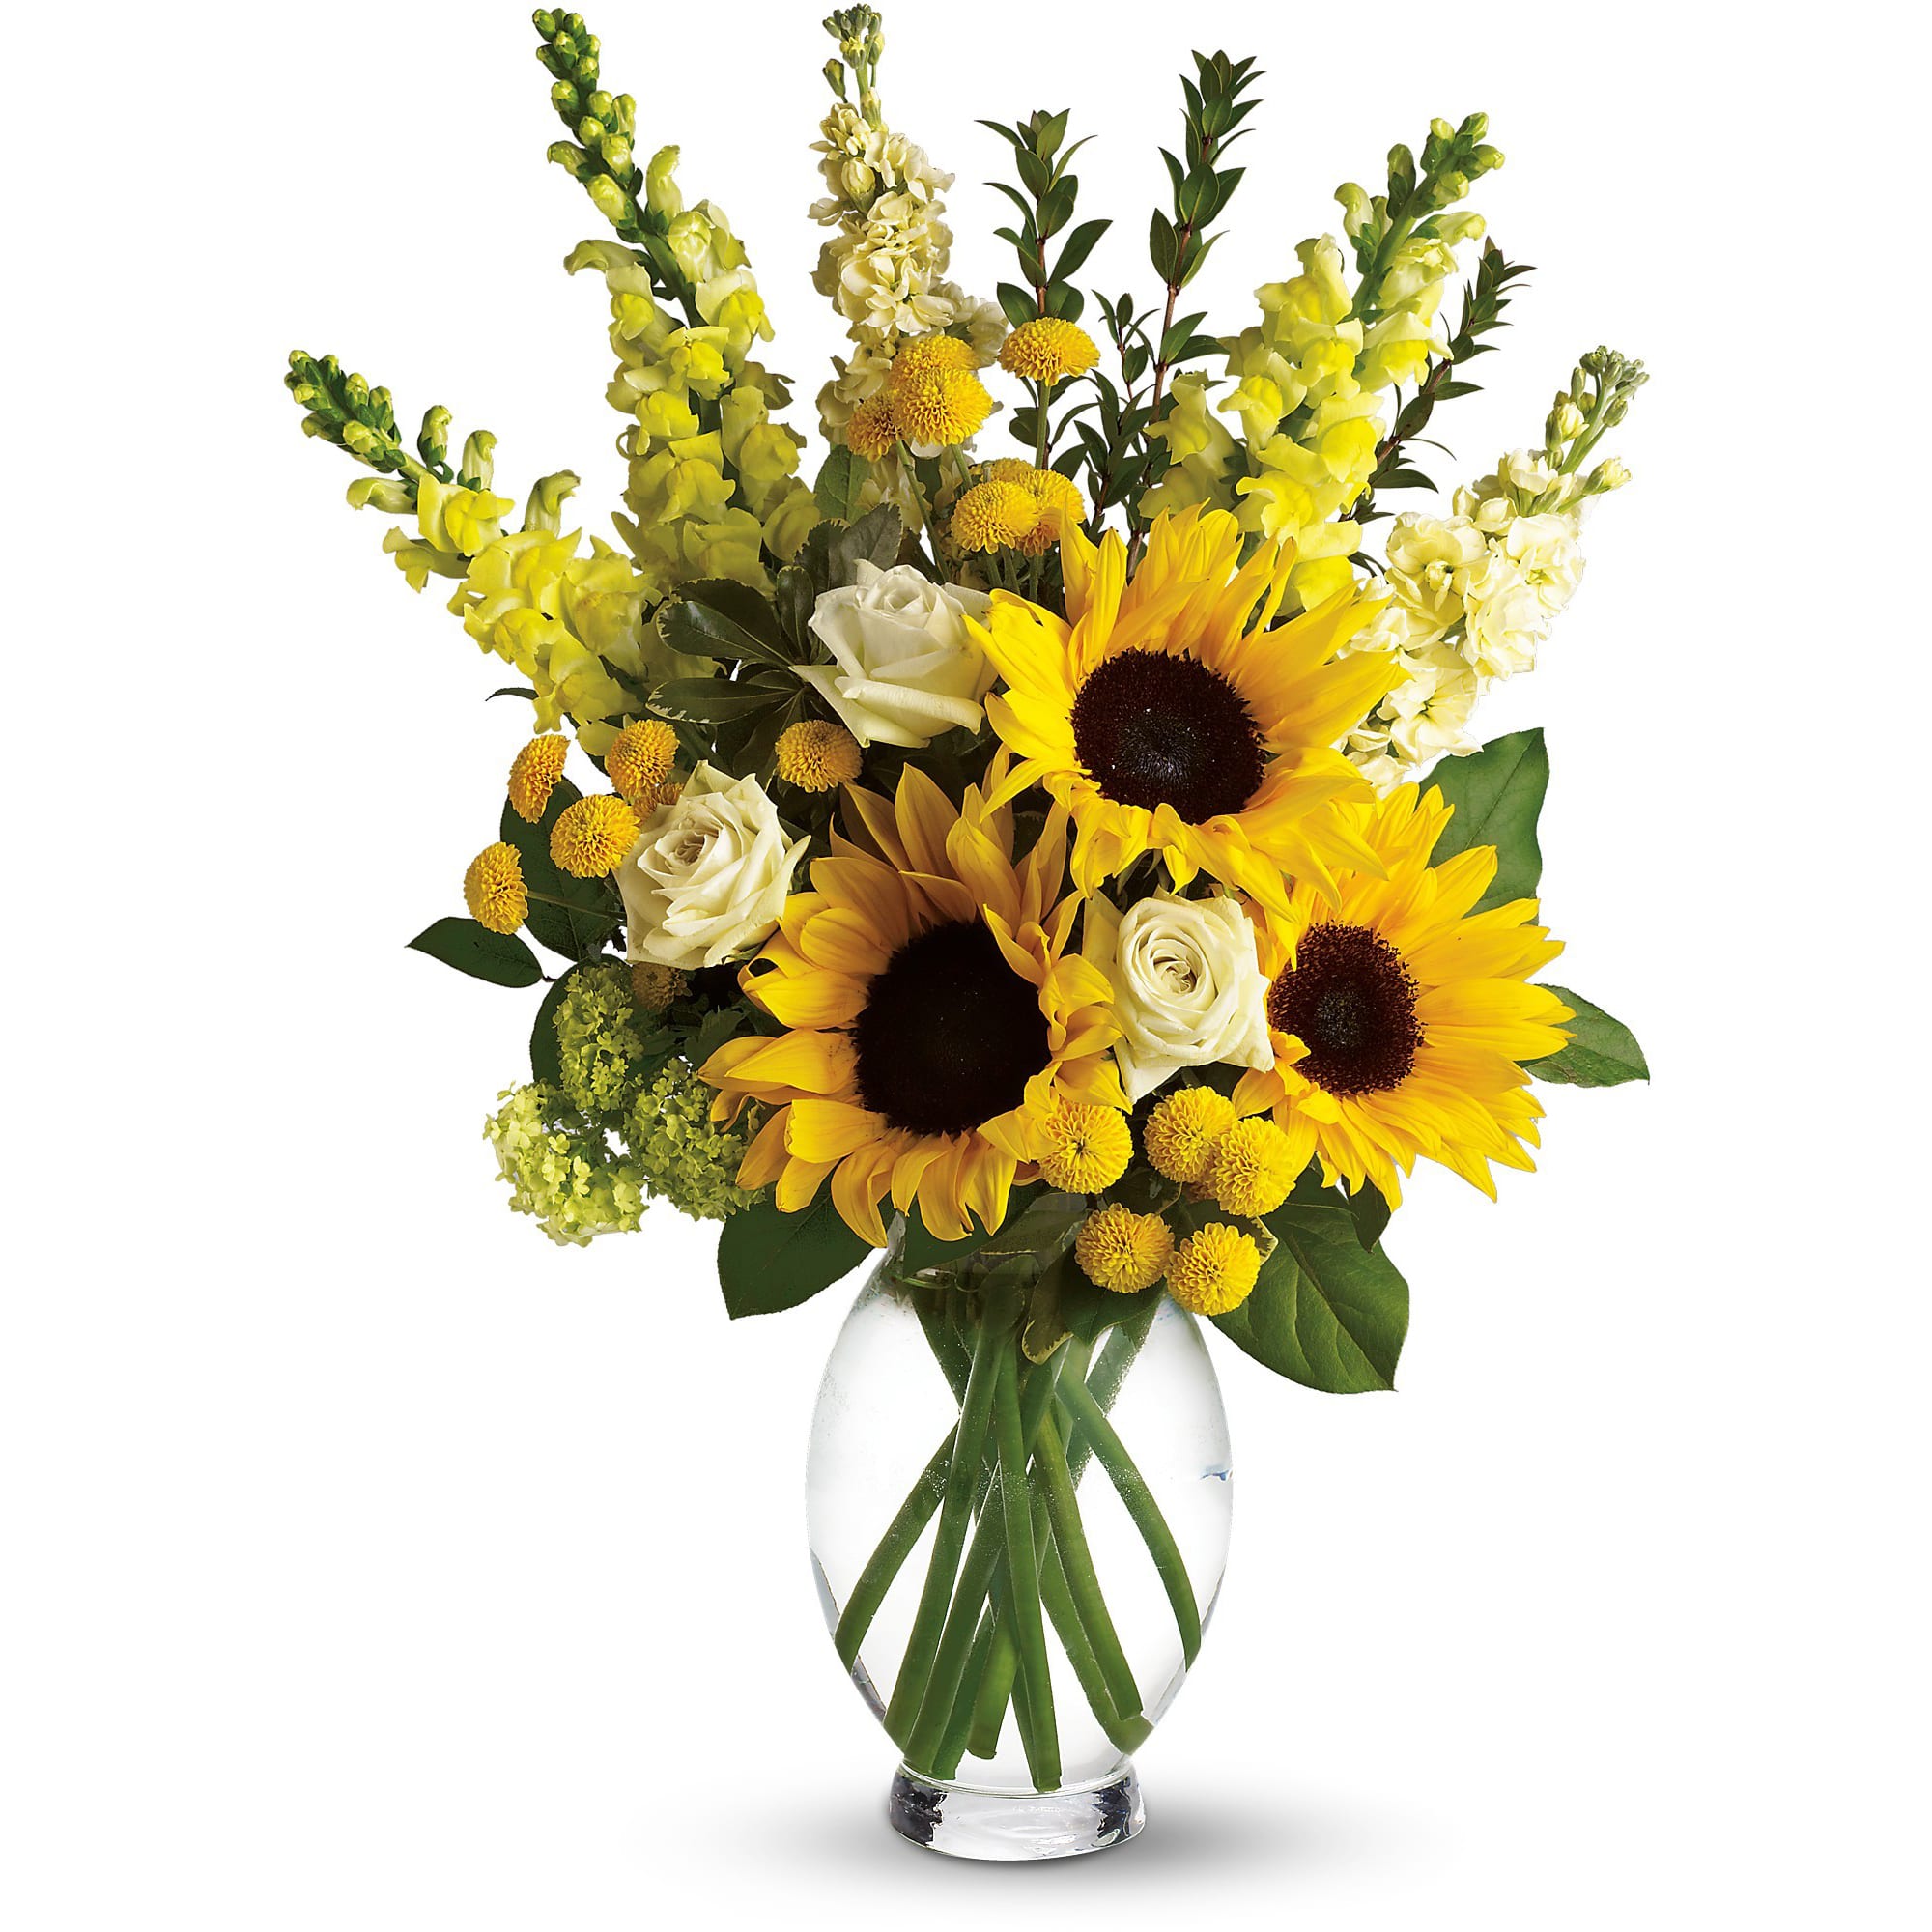 Here Comes the Sun by Teleflora - Here comes the sun and it's all bright, especially when it comes to this gorgeous bouquet. Anyone who receives this golden arrangement will definitely feel its warmth. 